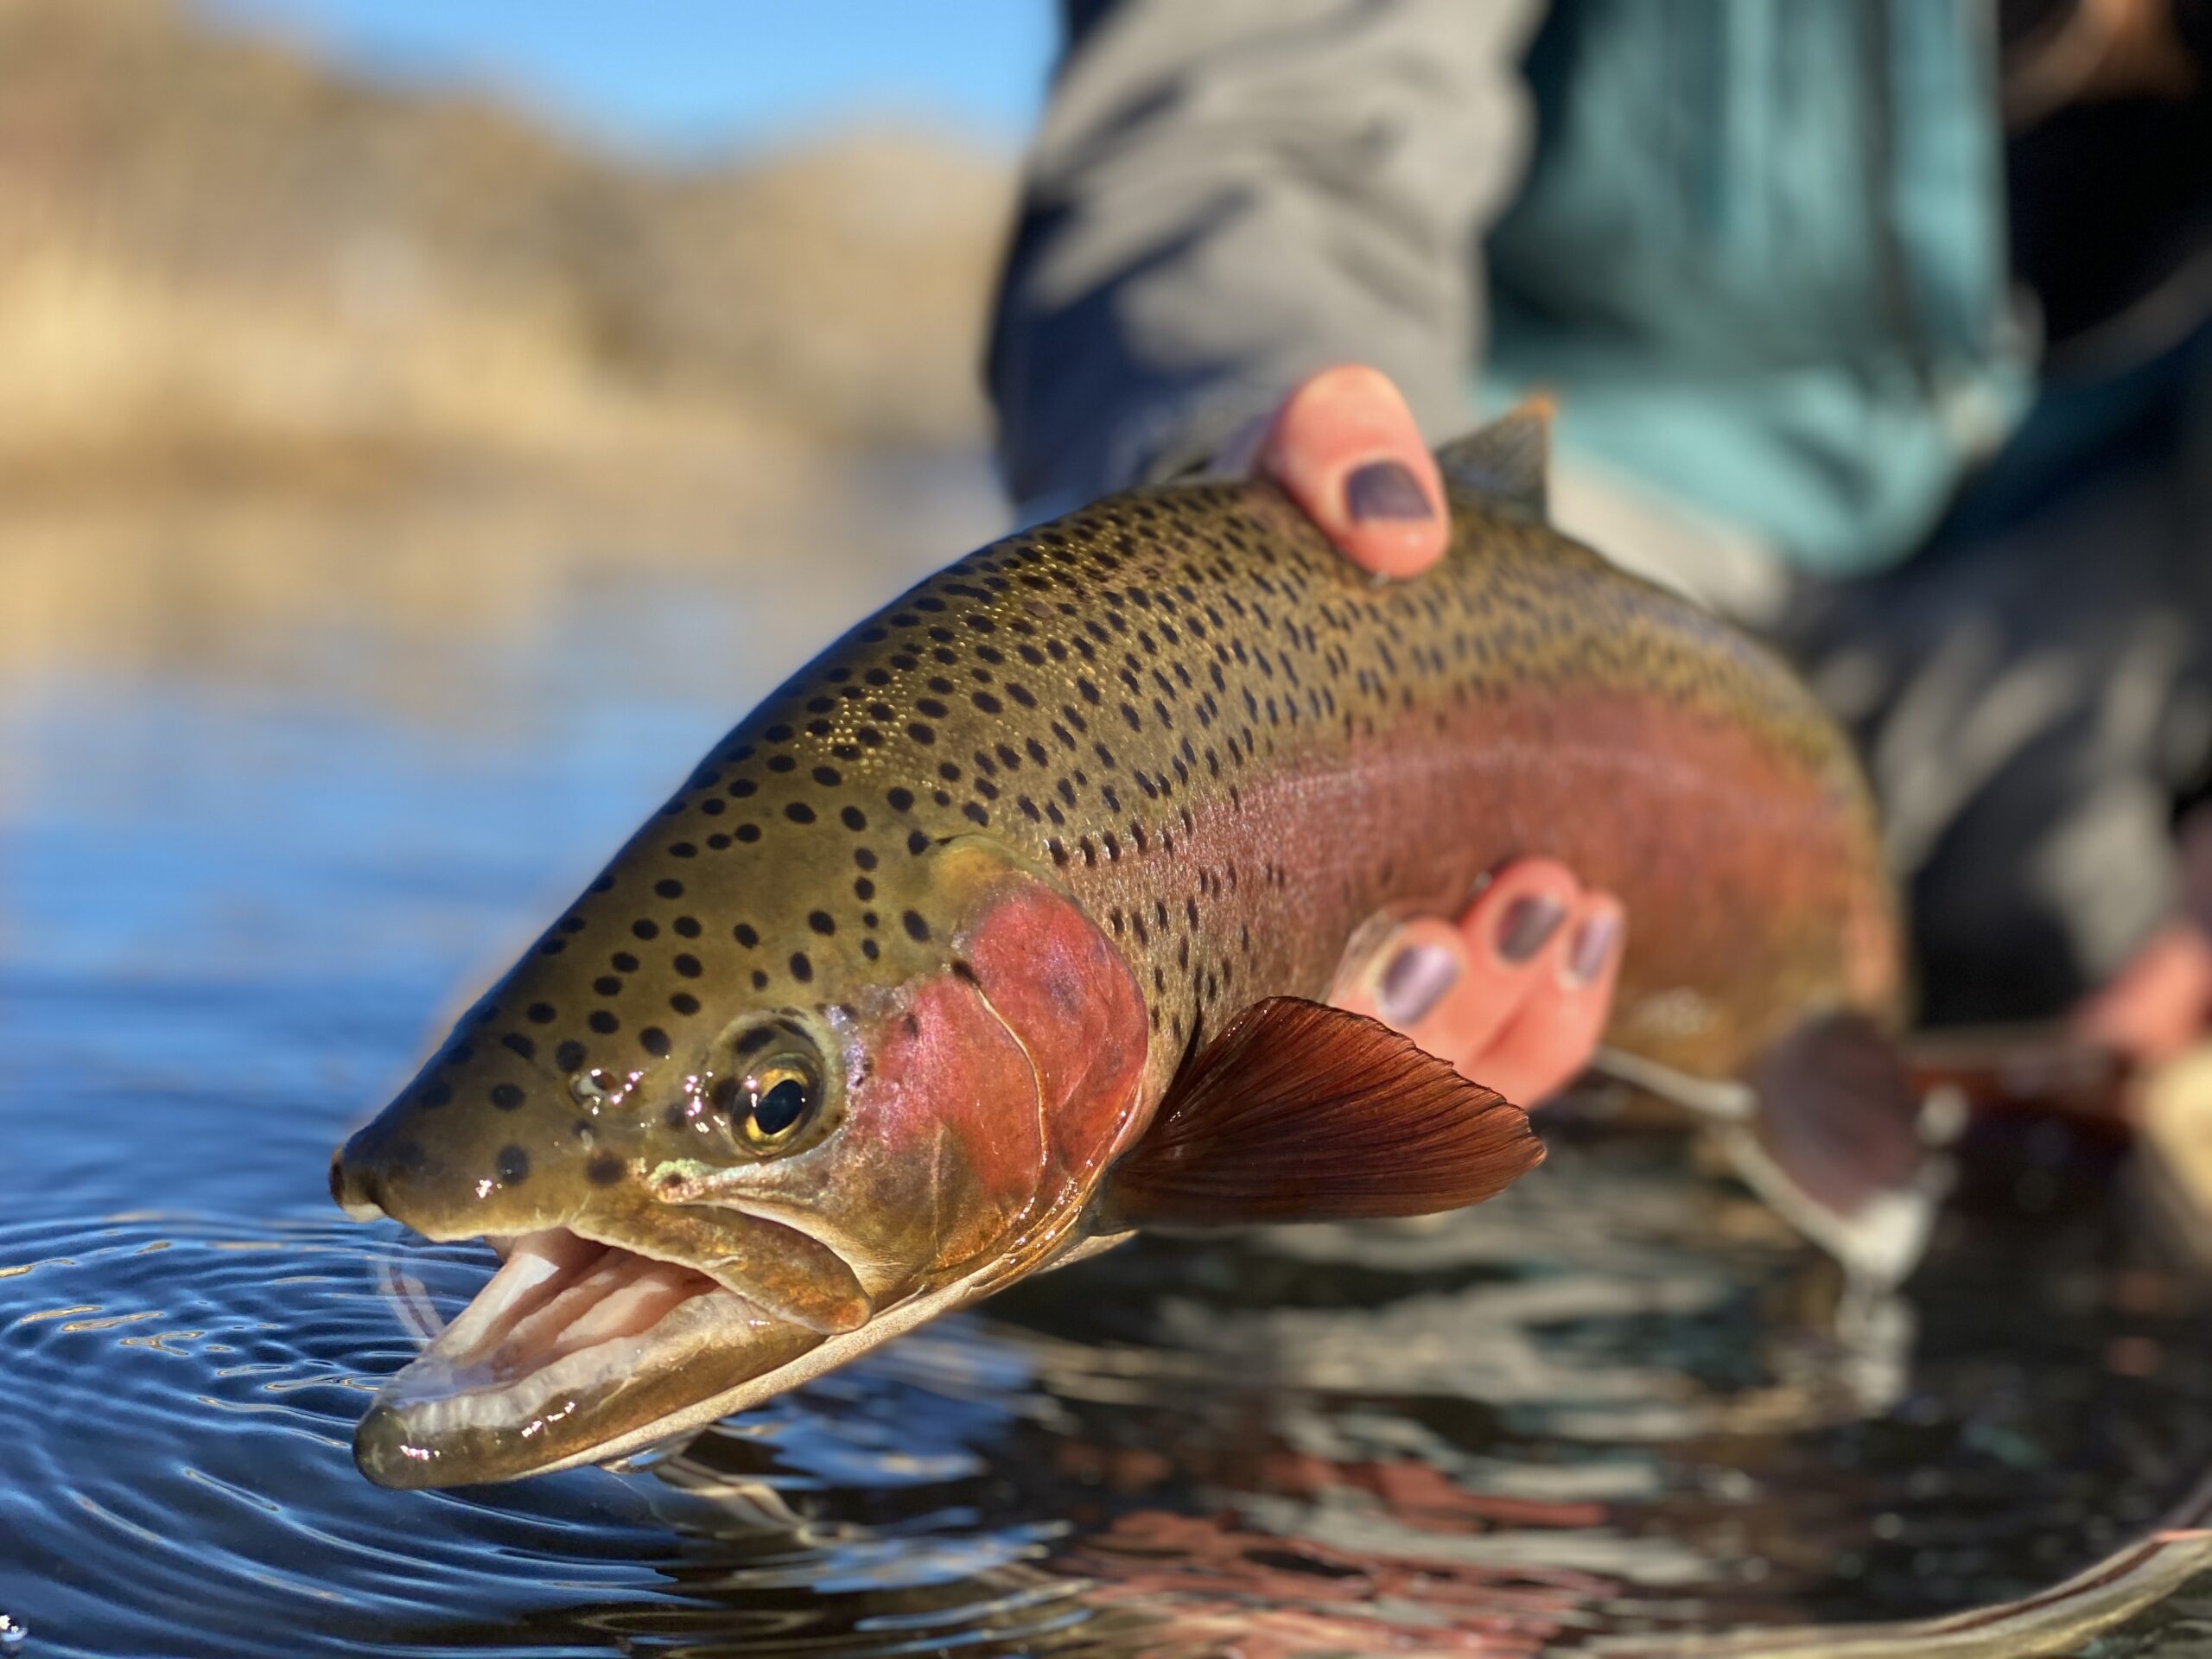 Rainbow Trout Fly Fishing